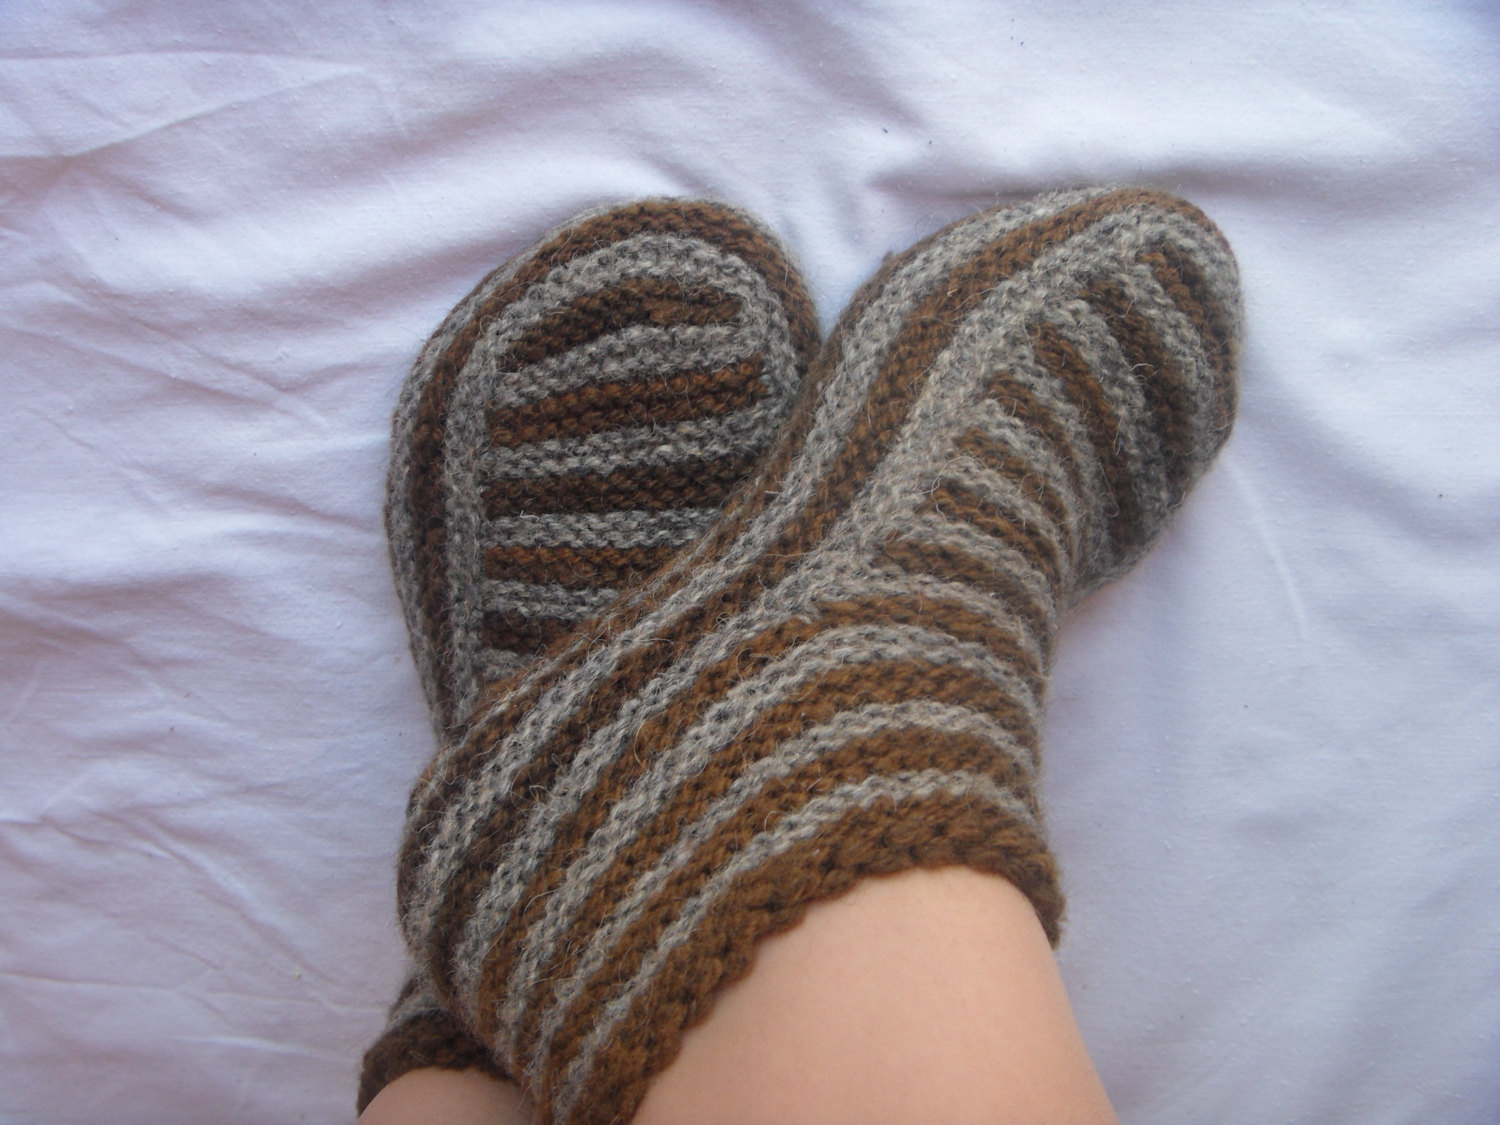 Knitted Slipper Patterns Adult Slippers Pattern Knitting Patterns Knit Slipper Pattern Knitted Slippers Knit Sliper Sock Slipper Sock Pattern Kids Slippers Pattern